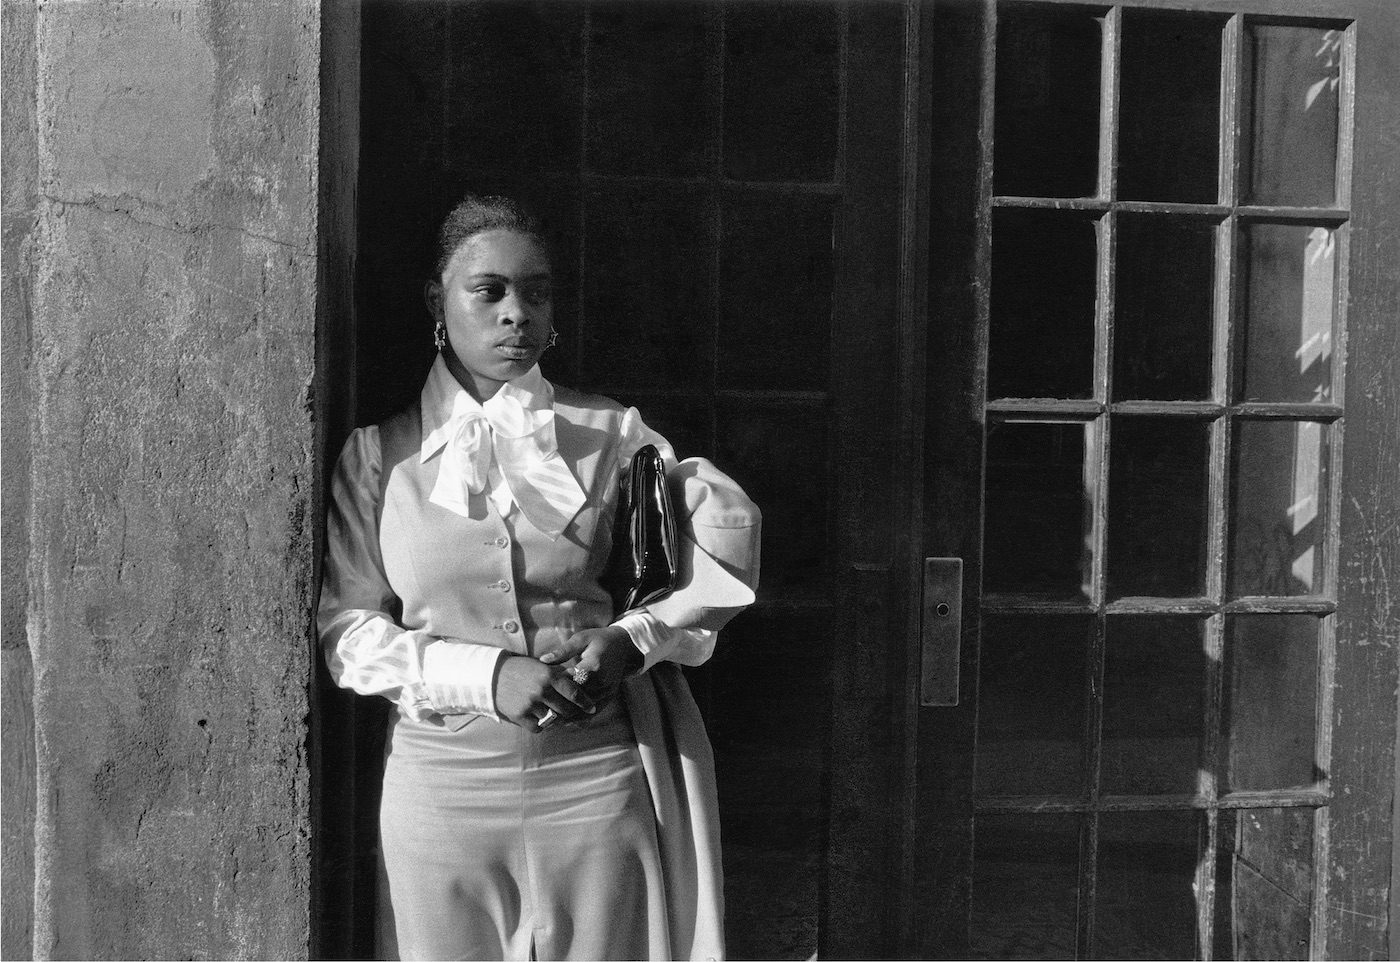 A Woman Waiting in the Doorway, Harlem, NY, 1976. Photograph by Dawoud Bey
